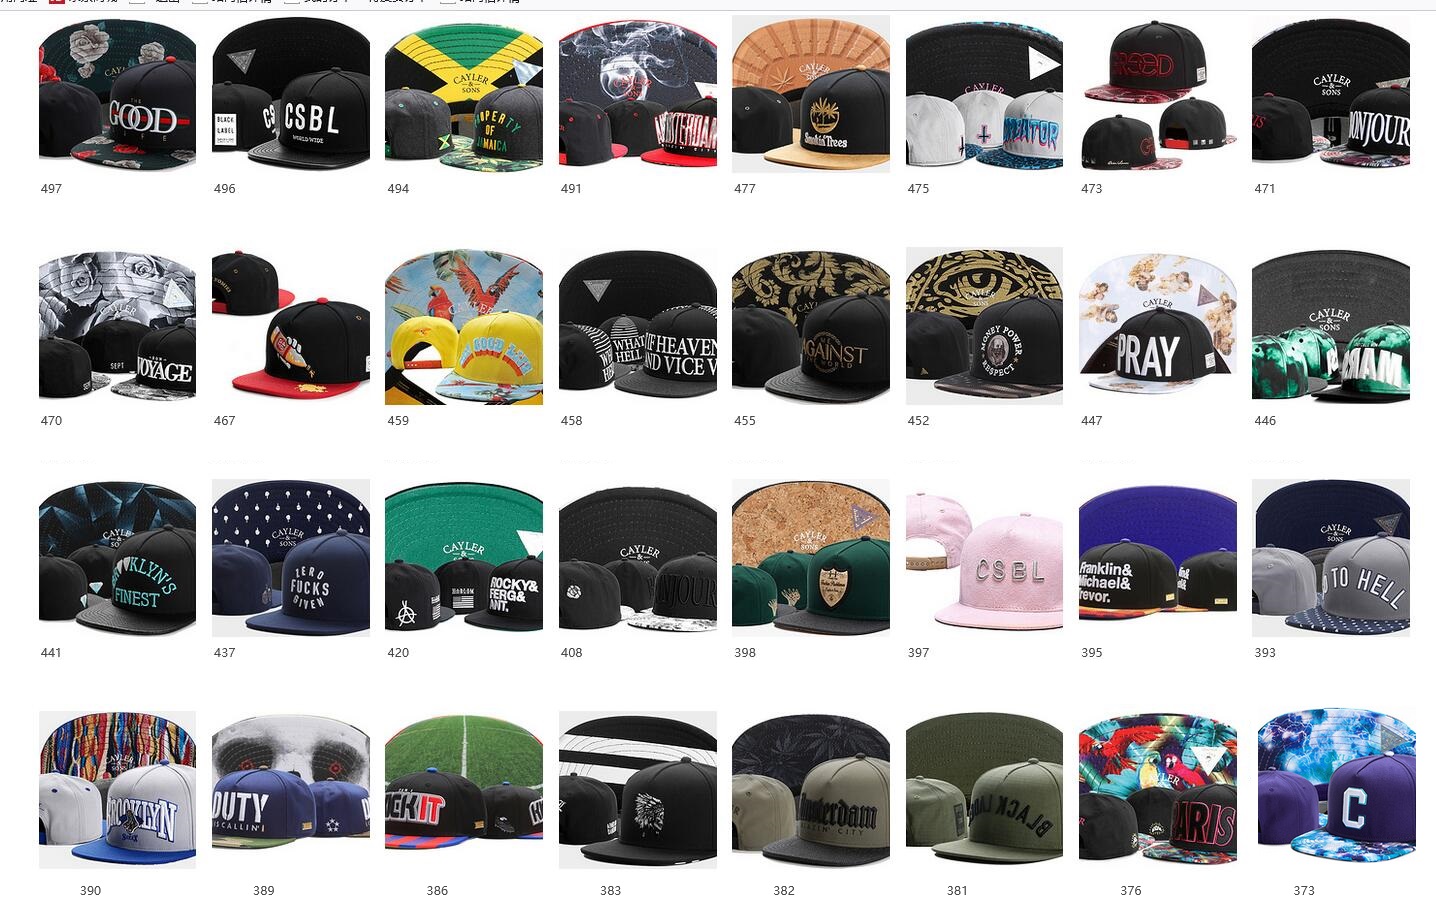 

2022 Cayler and Sons snapback caps and curved cap Hot Fashion Street New Hip-hop Hat Men Women Premium Unique Designs Headwear yakuda, Mix order accepted